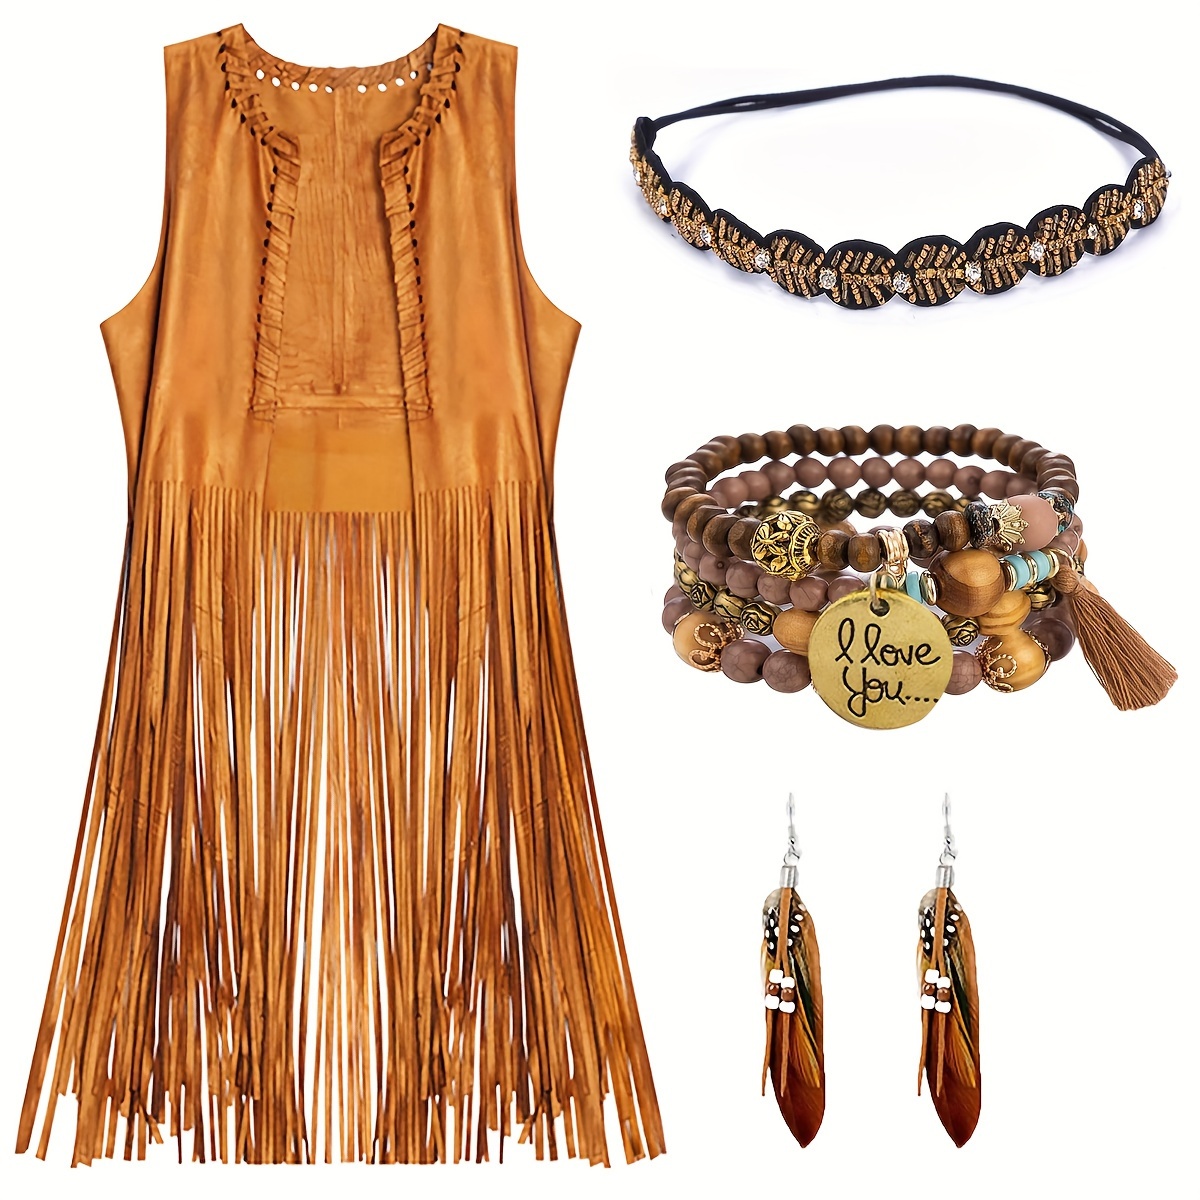 

60s 70s Outfits For Women Hippie Costume Clothes Woman Cowgirl Halloween Costumes Accessories 4pcs Set, Fringe Vest, Boho Crystal Headband, Wooden Bead Bracelet, Bohemian Earrings